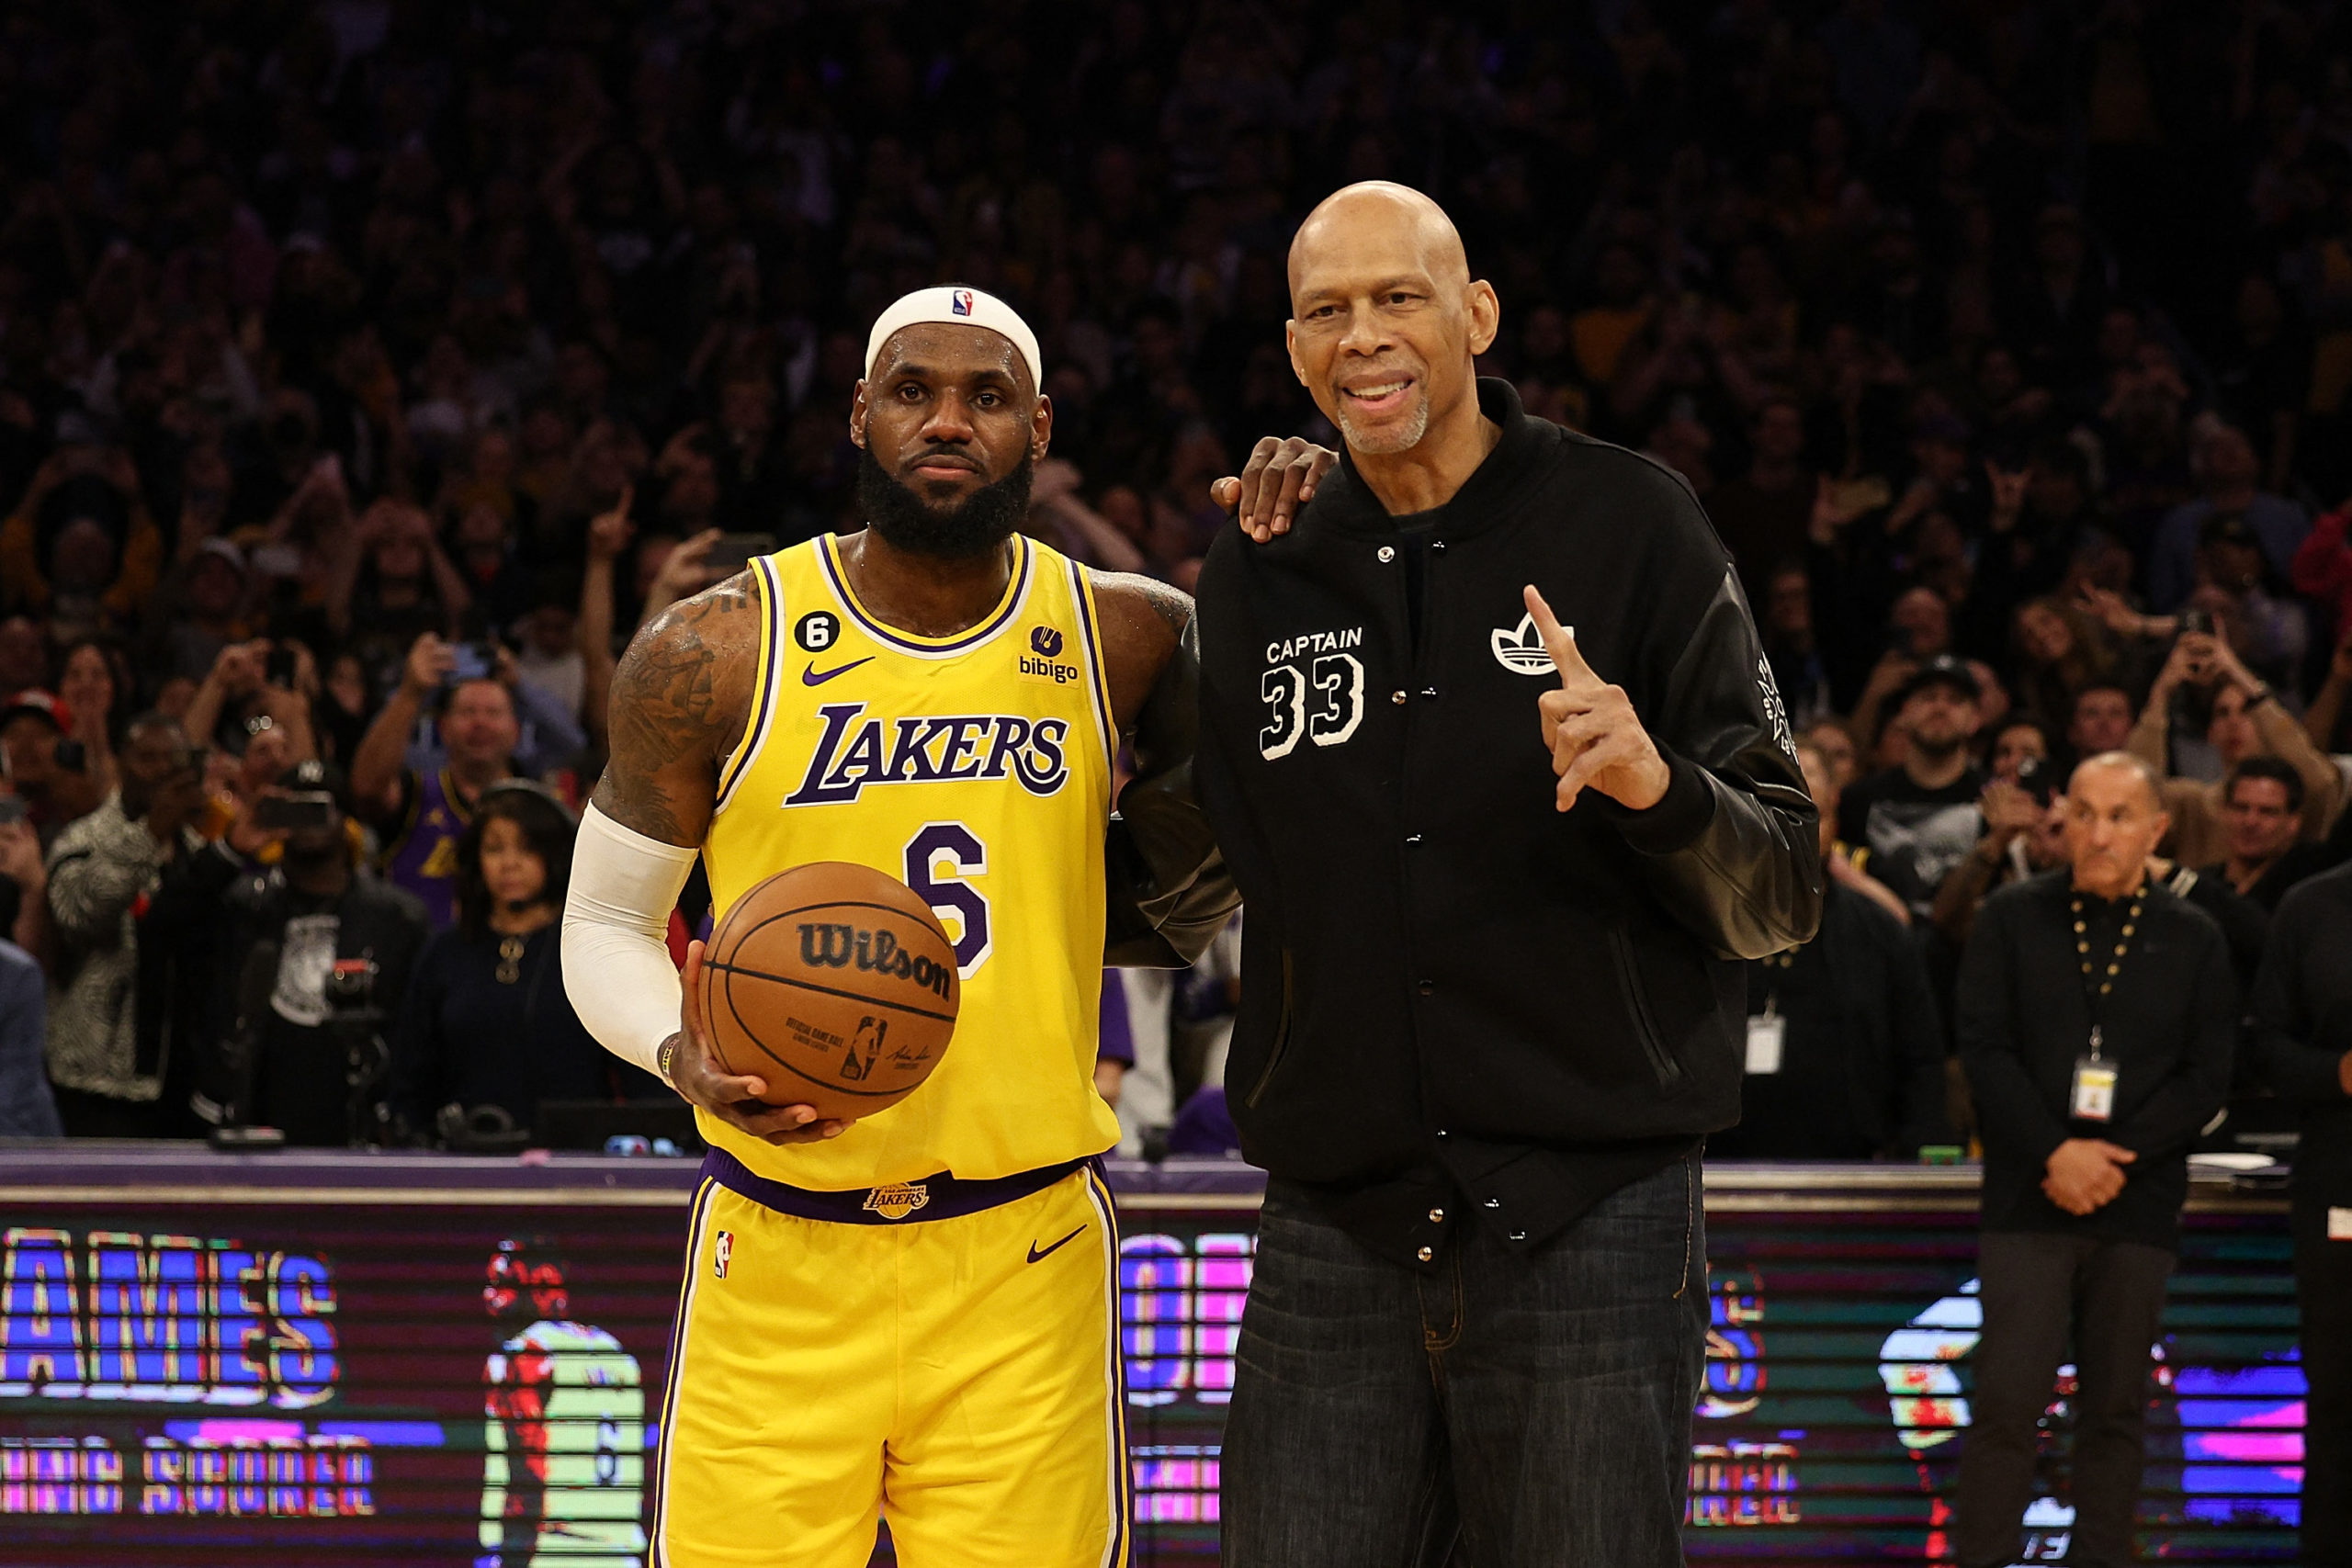 LOS ANGELES, CALIFORNIA - FEBRUARY 07: Kareem Abdul-Jabbar stands on court with LeBron James #6 of the Los Angeles Lakers after James passed Abdul-Jabbar to become the NBA's all-time leading scorer, surpassing Abdul-Jabbar's career total of 38,387 points against the Oklahoma City Thunder at Crypto.com Arena on February 07, 2023 in Los Angeles, California. 